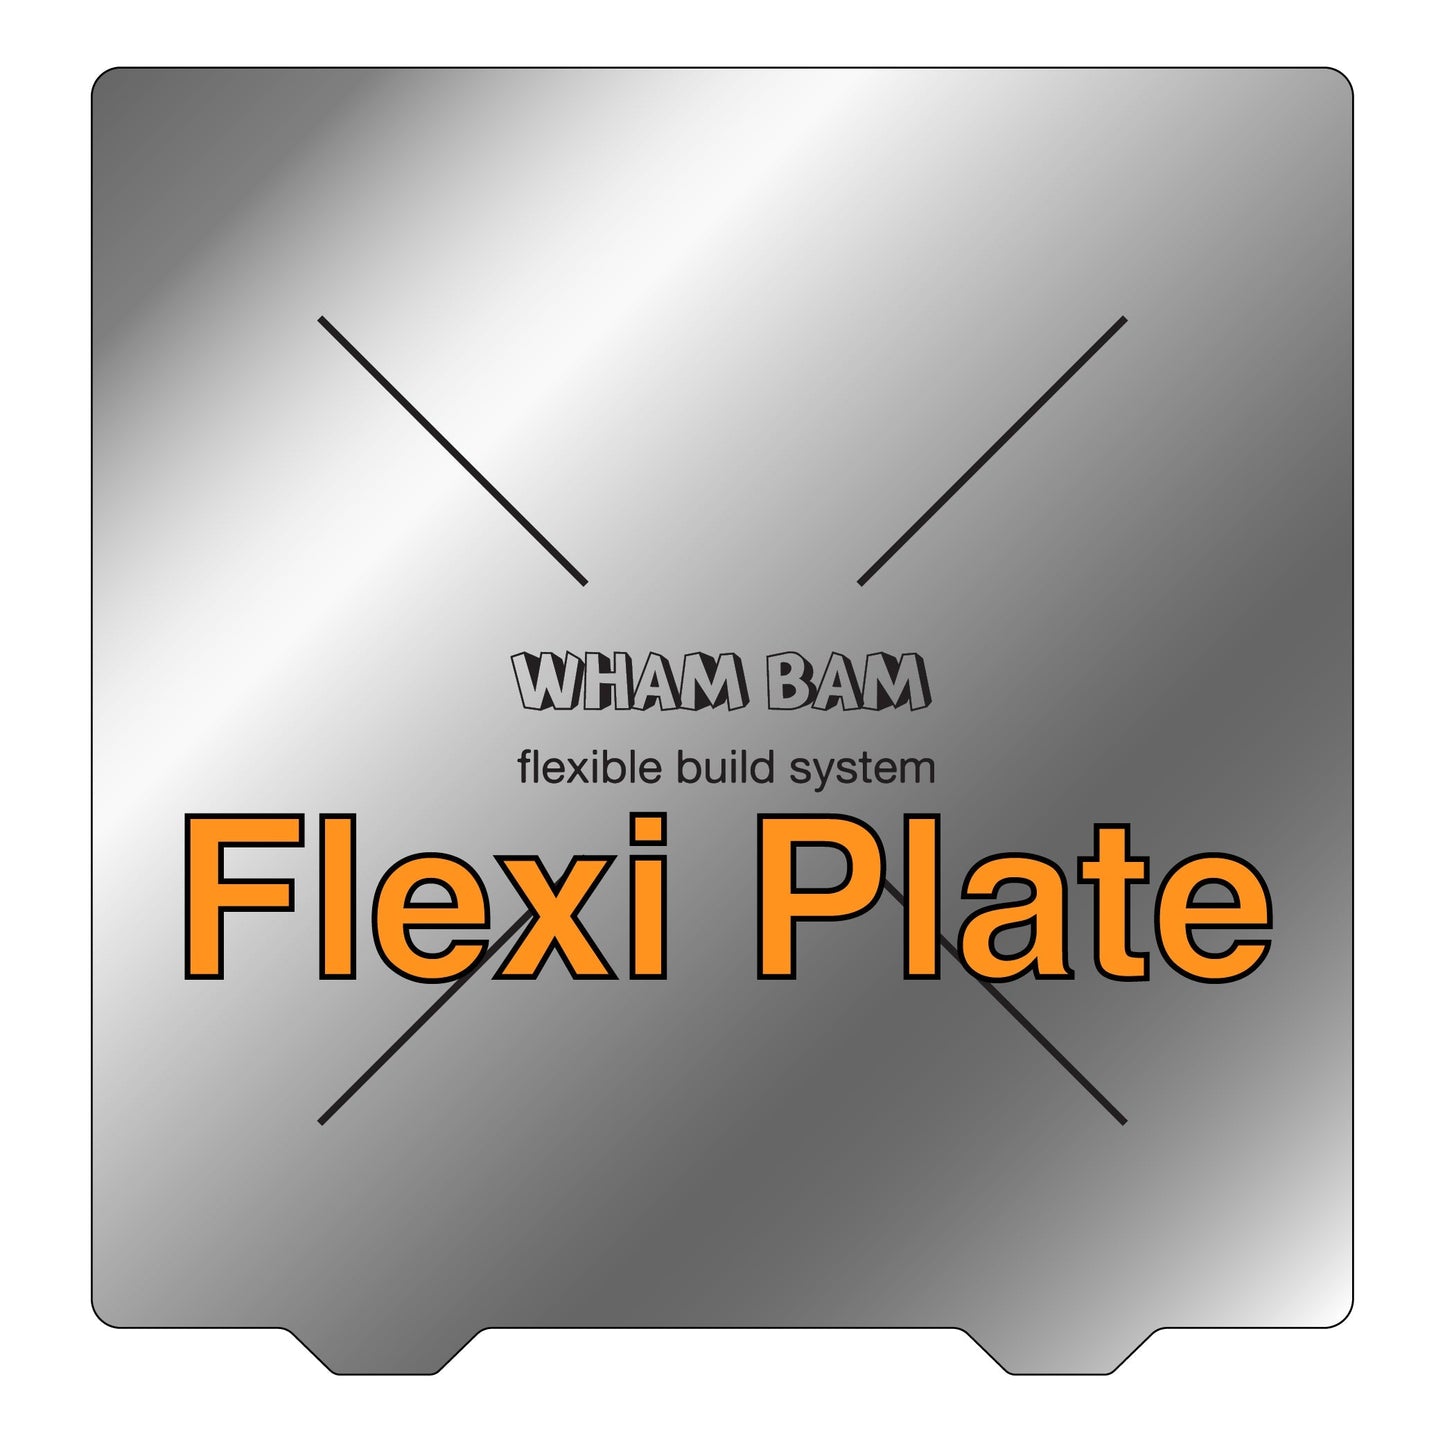 Flexi Plate Only (No Build Surface) - 430 x 430 - Elegoo Neptune 3 Max, Neptune 4 Max, and AnyCubic Kobra 2 Max